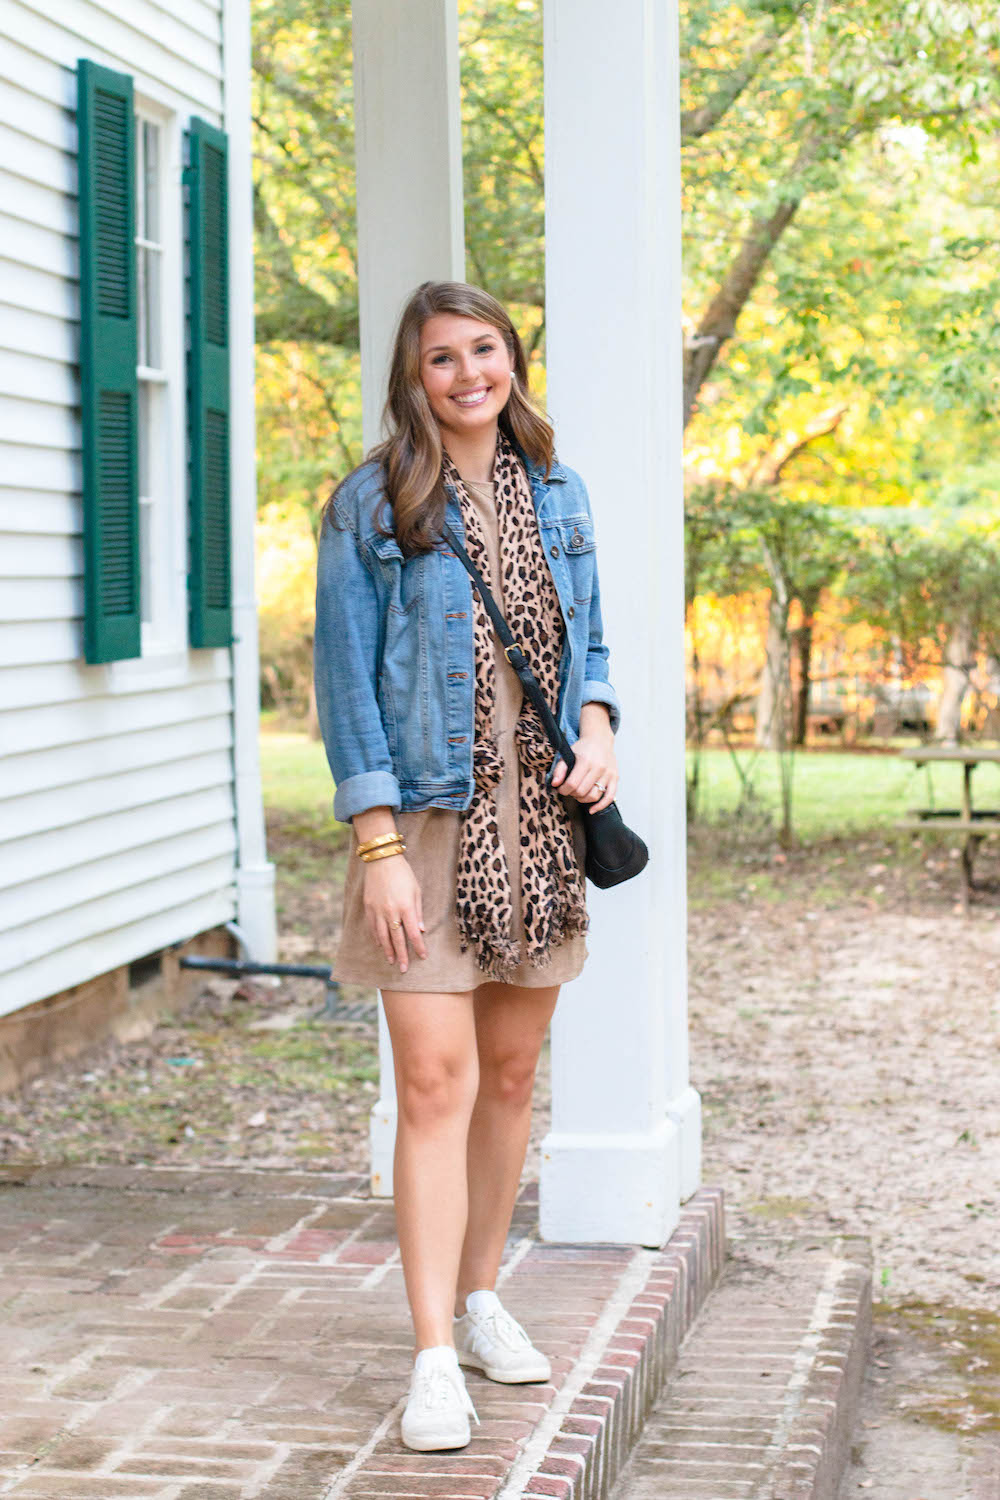 The Best Suede dress for fall